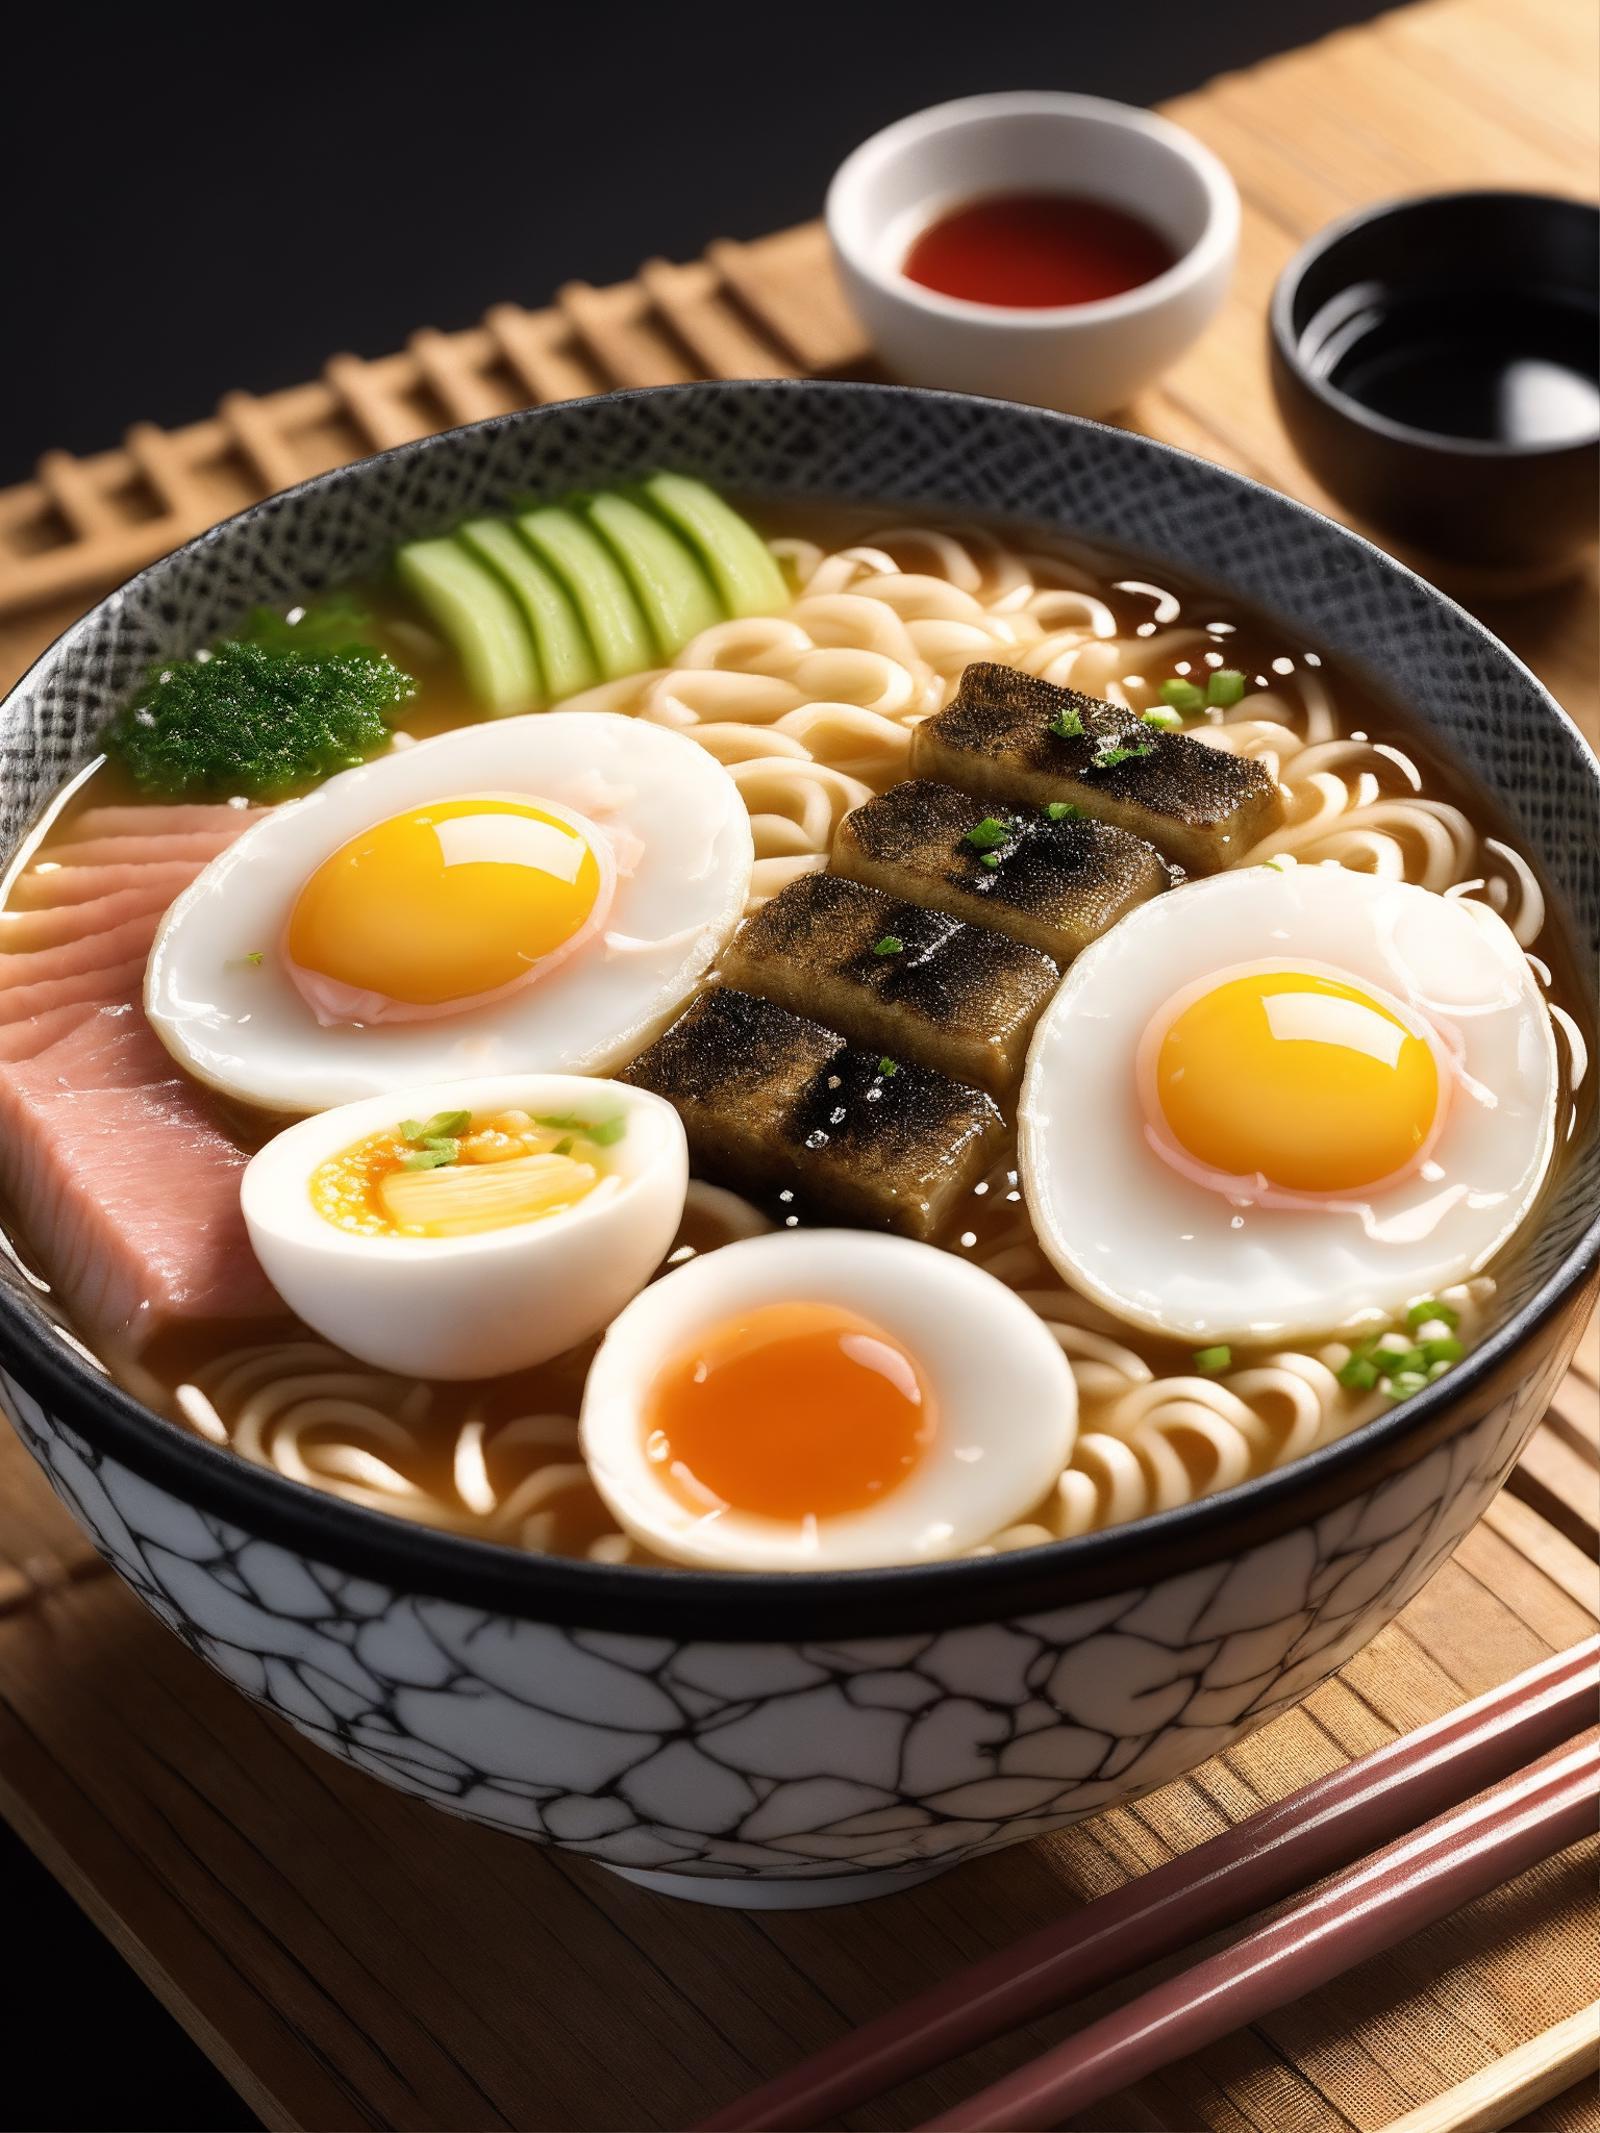 A bowl of soup with egg, noodles, and fish.